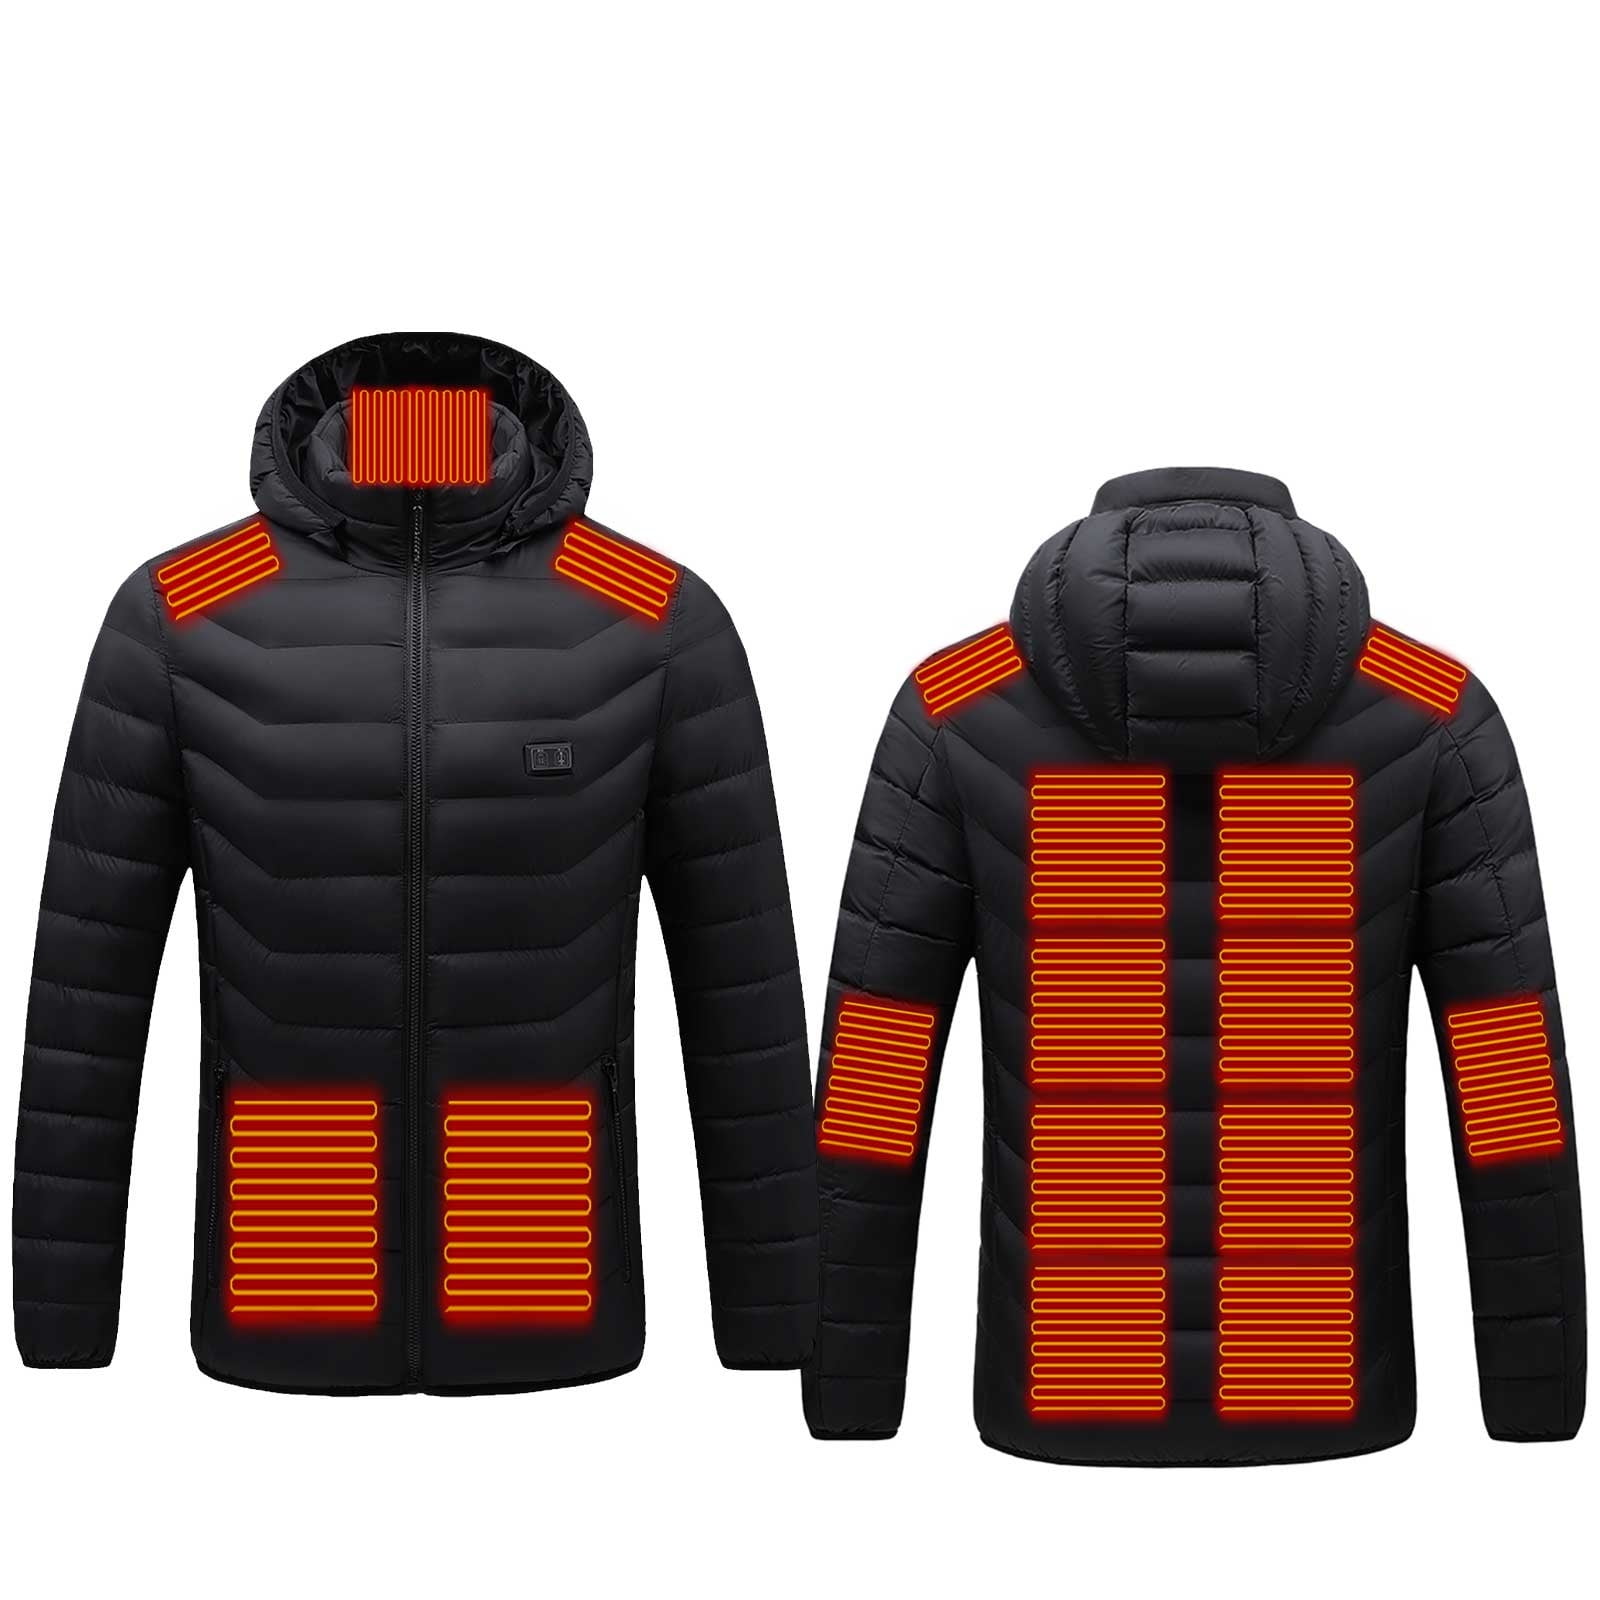 Heated Hooded Jacket for Men Women USB Charging Electric Body Warmer ...